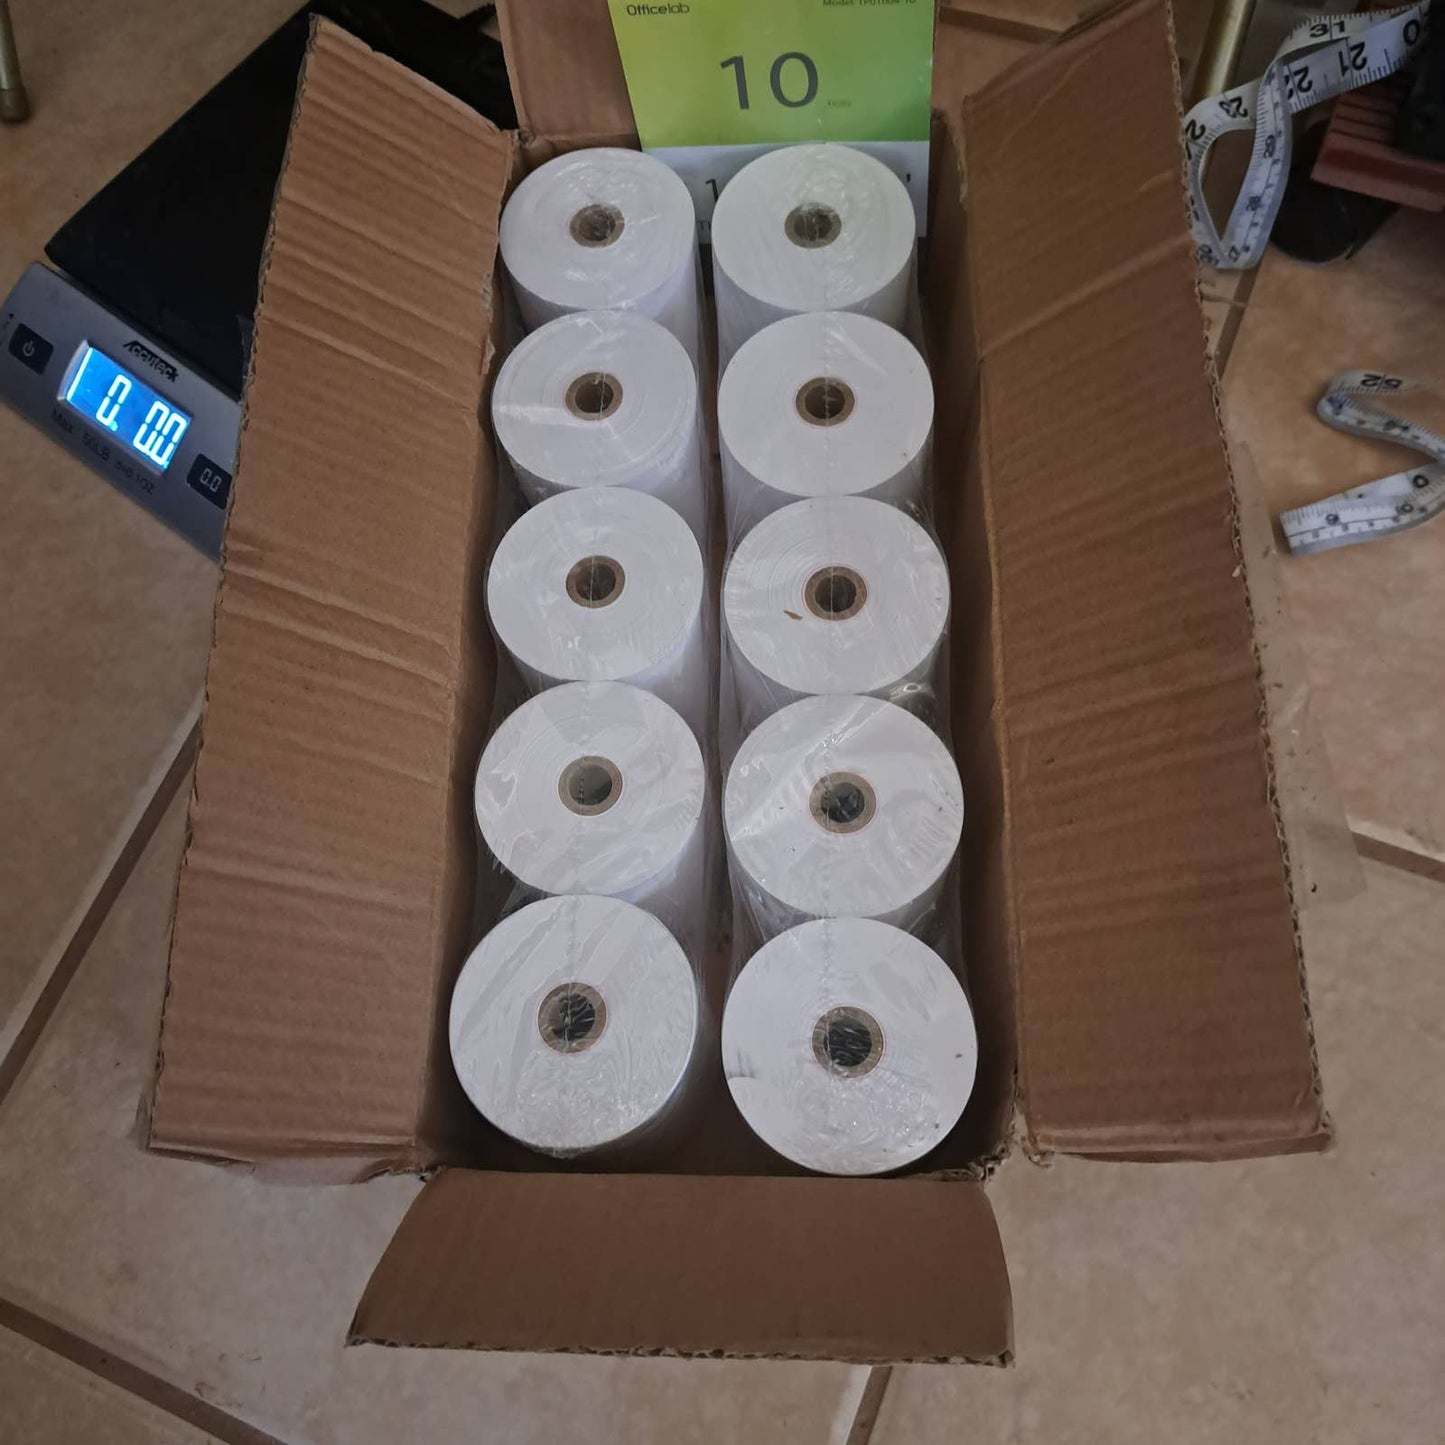 10 Rolls Thermal POS Paper 3 1/8 In x 230 ft - NEW